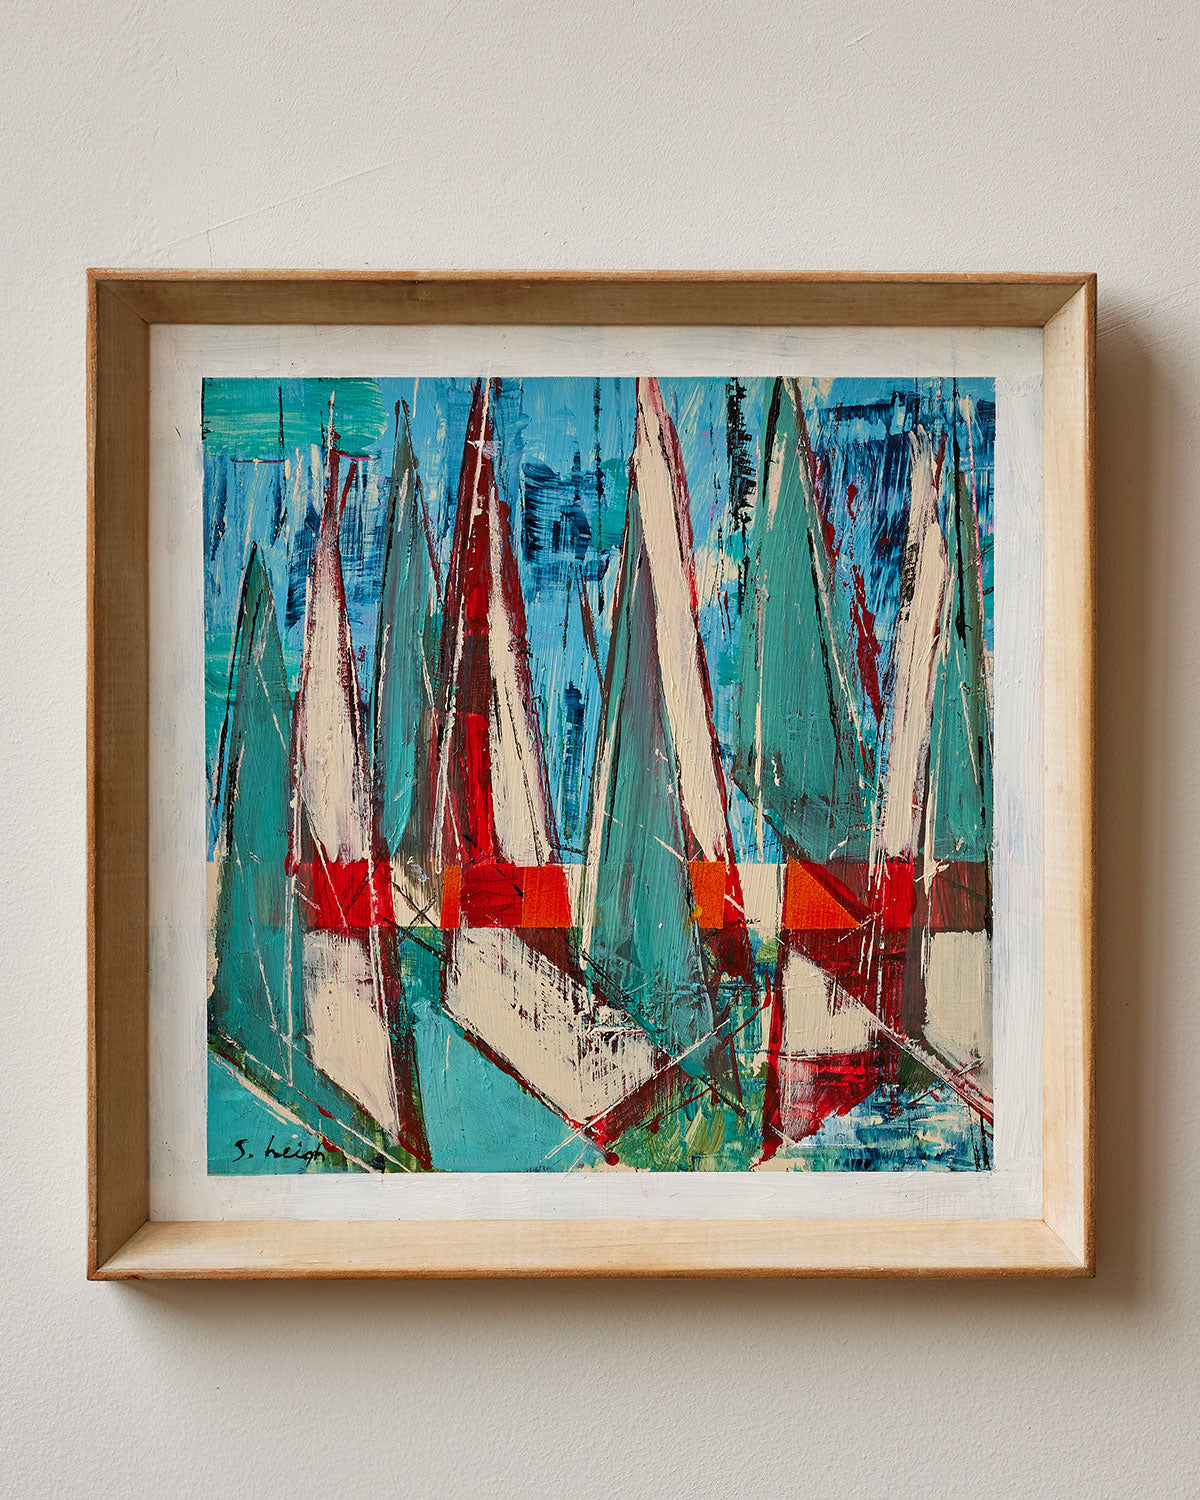 "Sailboats Sunset" by Stephen Heigh